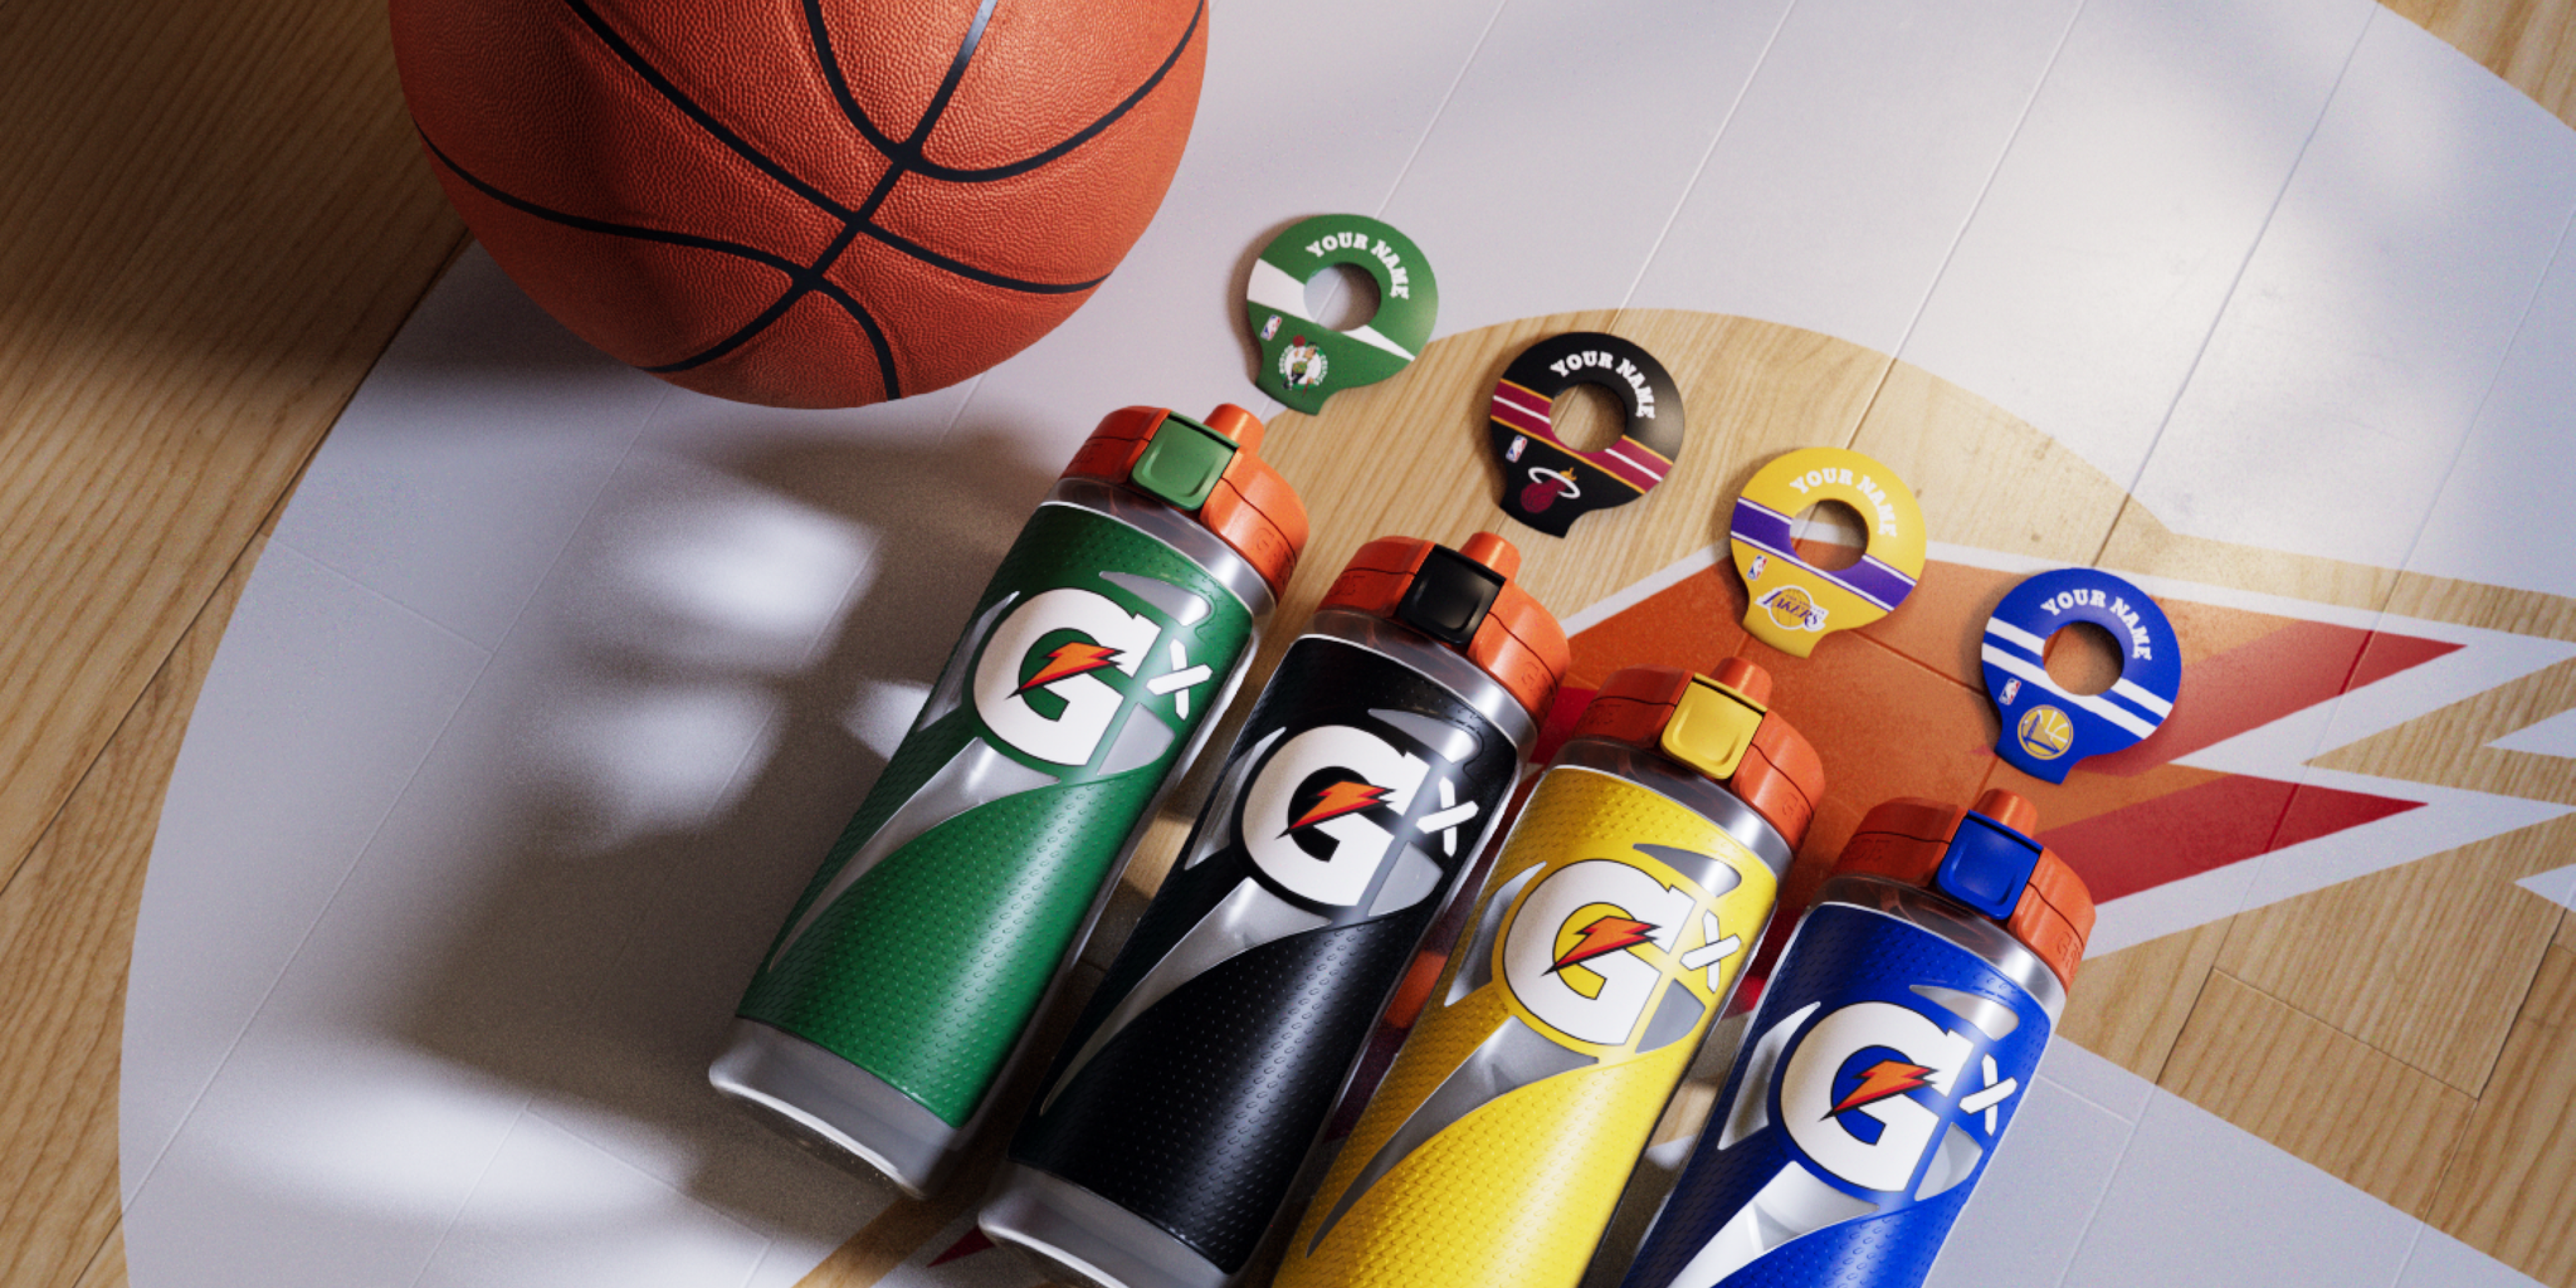 NBA Bottles on court with basketball